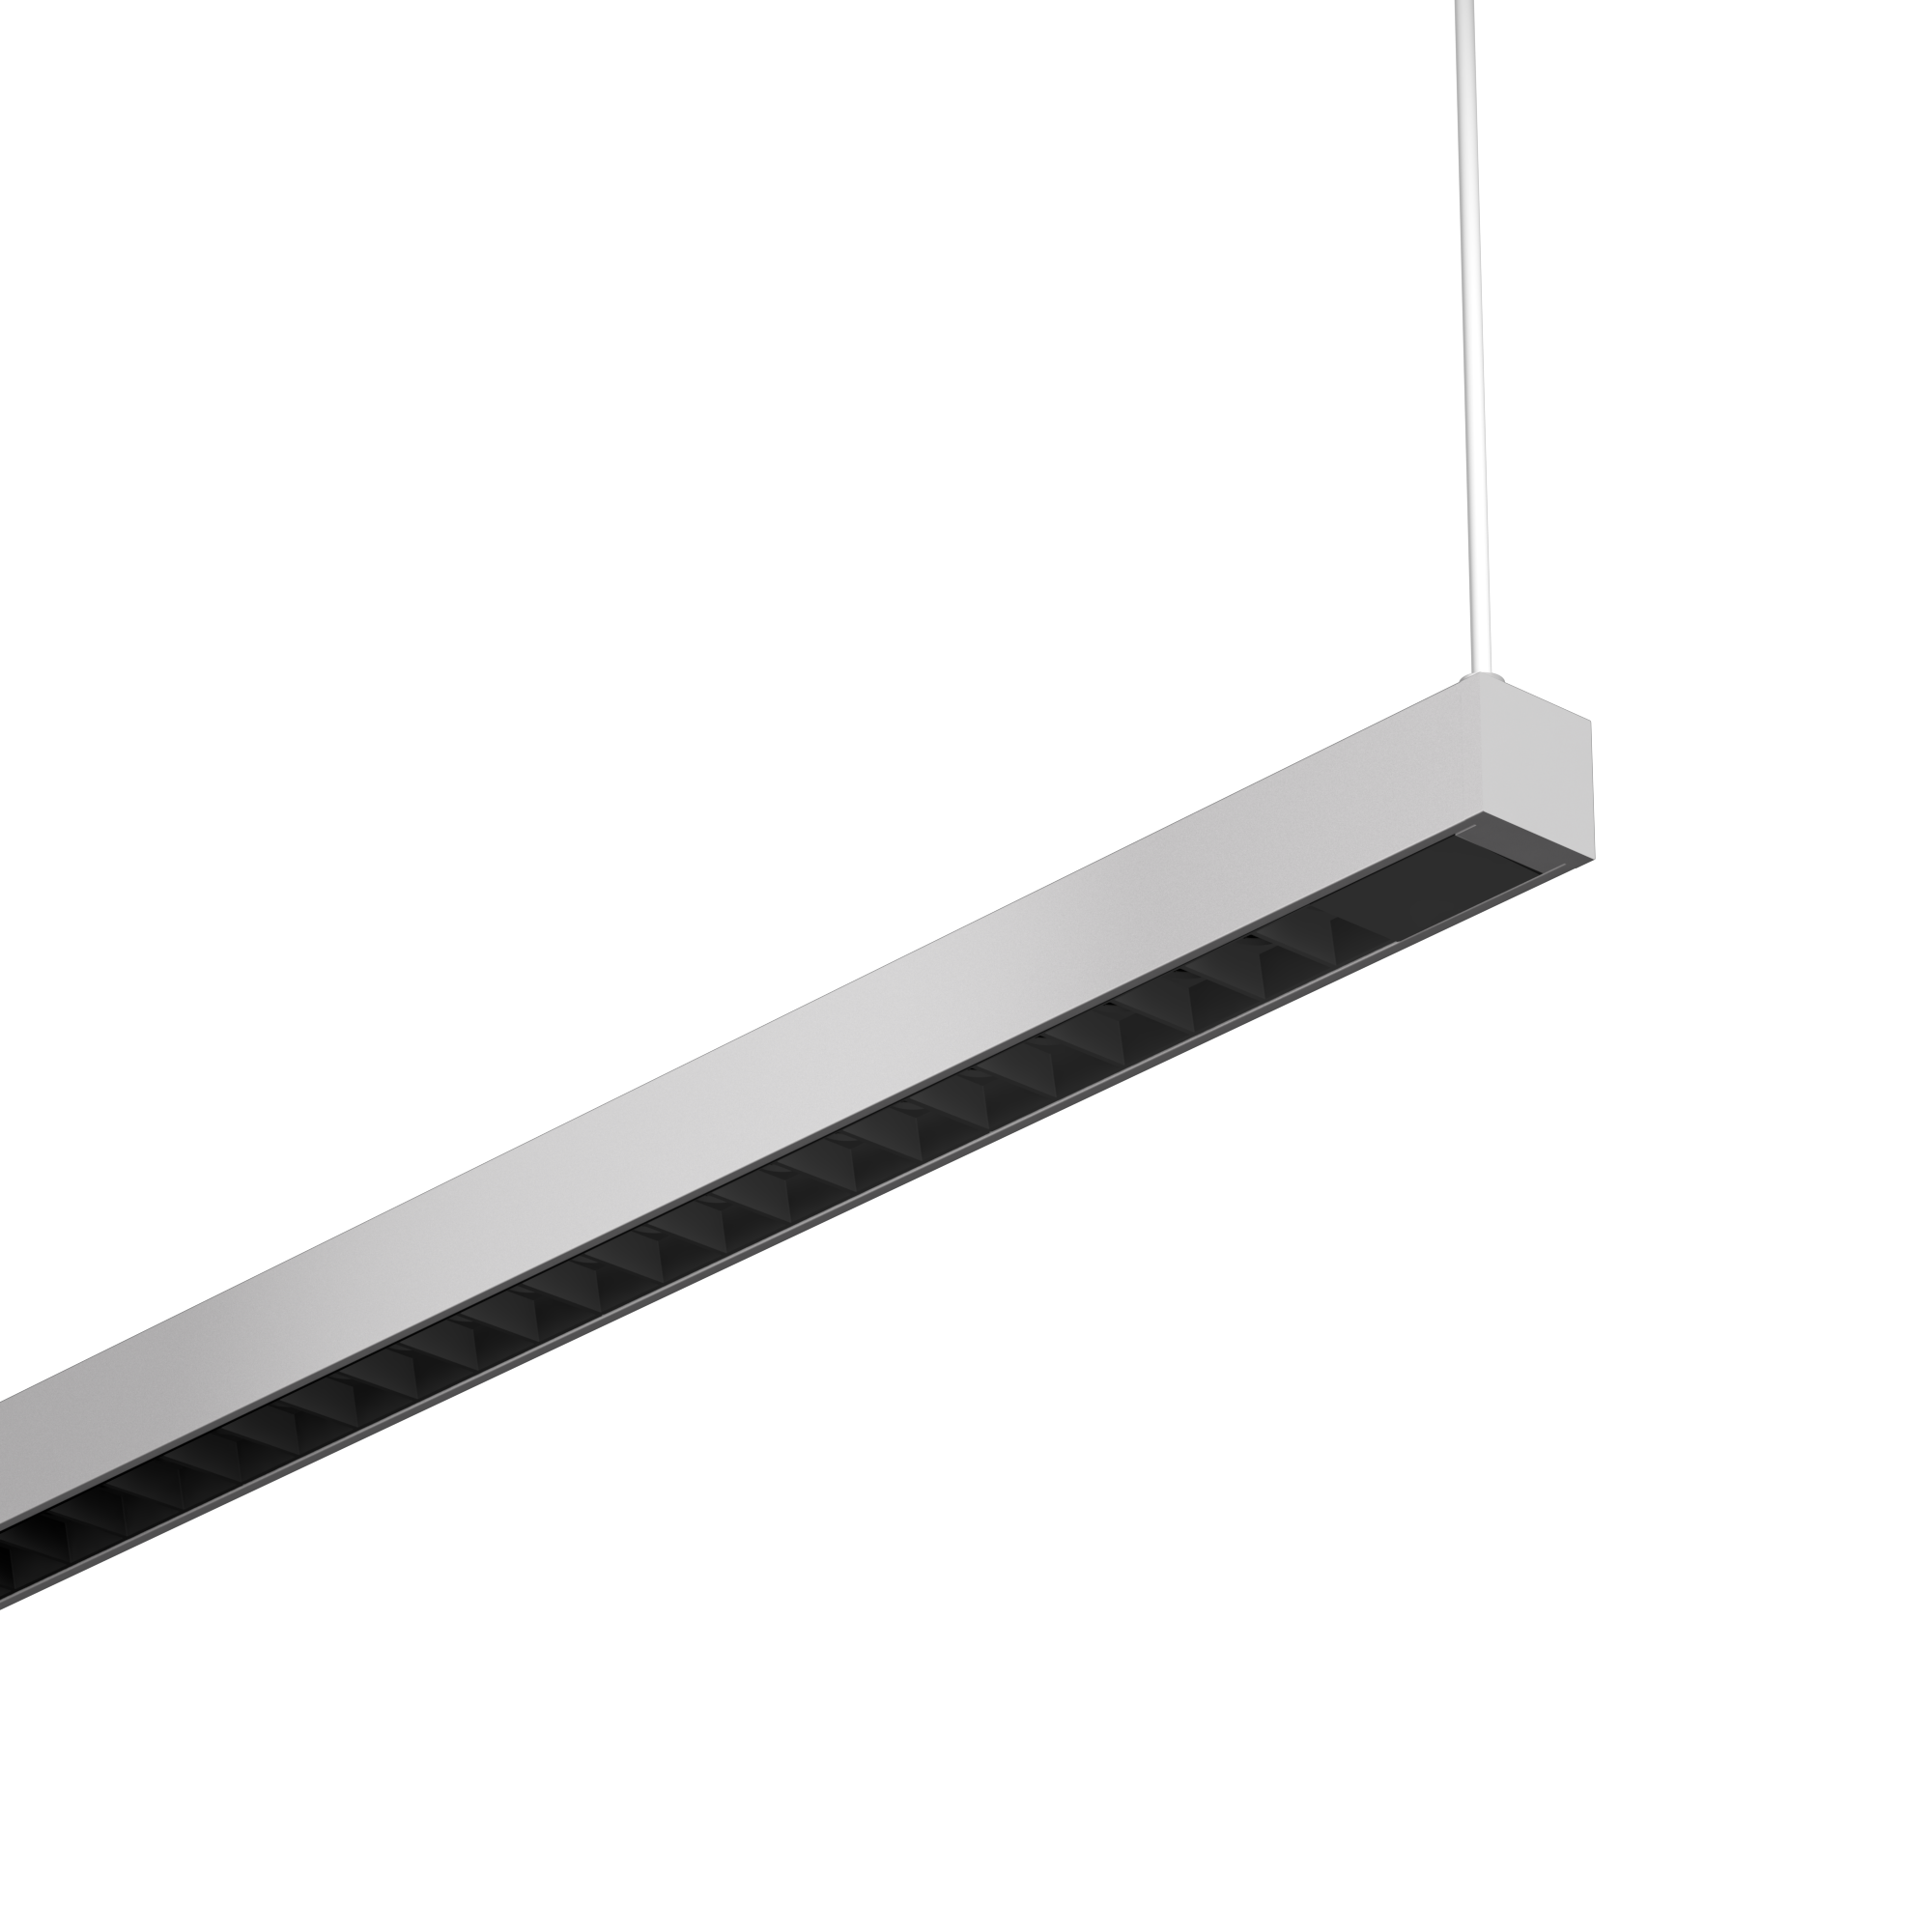 0.95” Ultra-Compact Suspended LED Linear
NANOSquare Pendant is a 0.95” square suspended LED linear light fixture, providing both direct (down) and indirect (up) lighting.  NANOSquare Pendant delivers SmartBeam® capabilities to an ultrasmall graphic scale that complements architectural space. NANOSquare Pendant features a remote driver and 